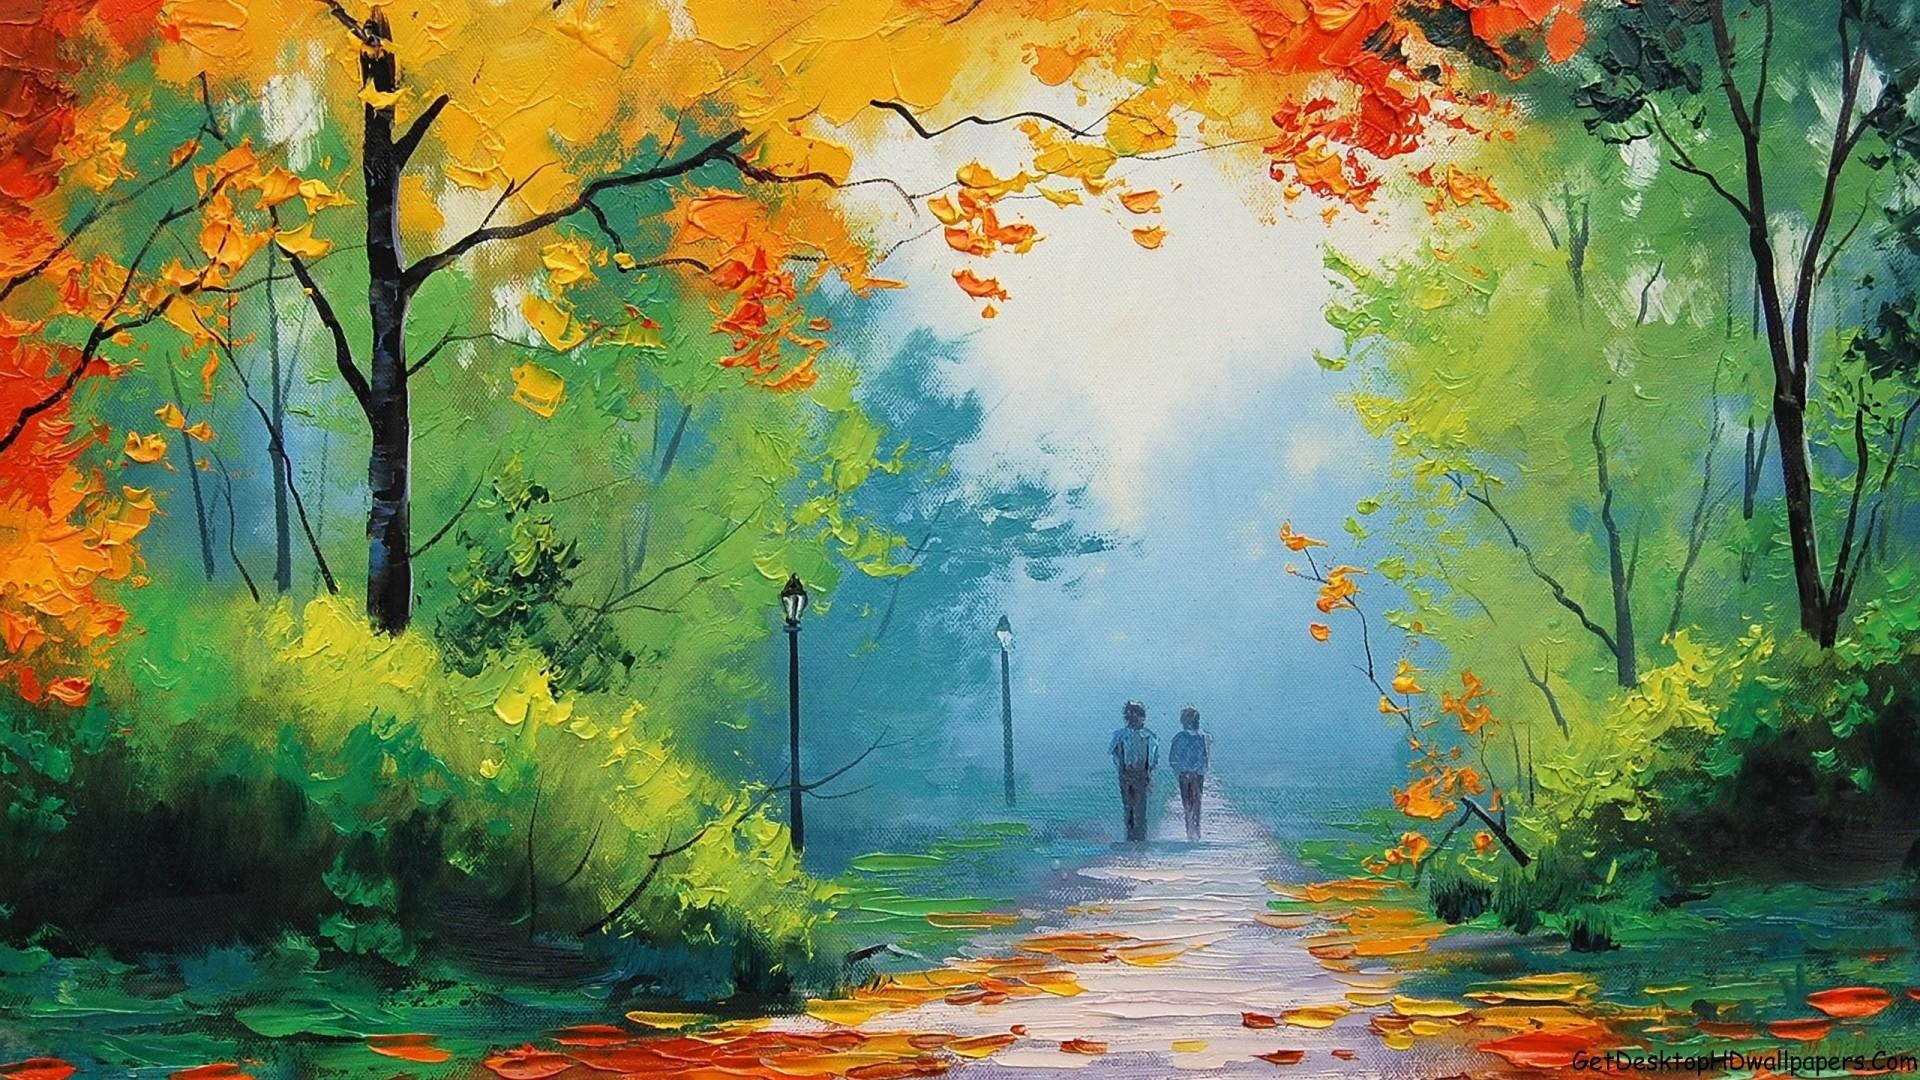 Couple In Forest Paint Art Wallpaper